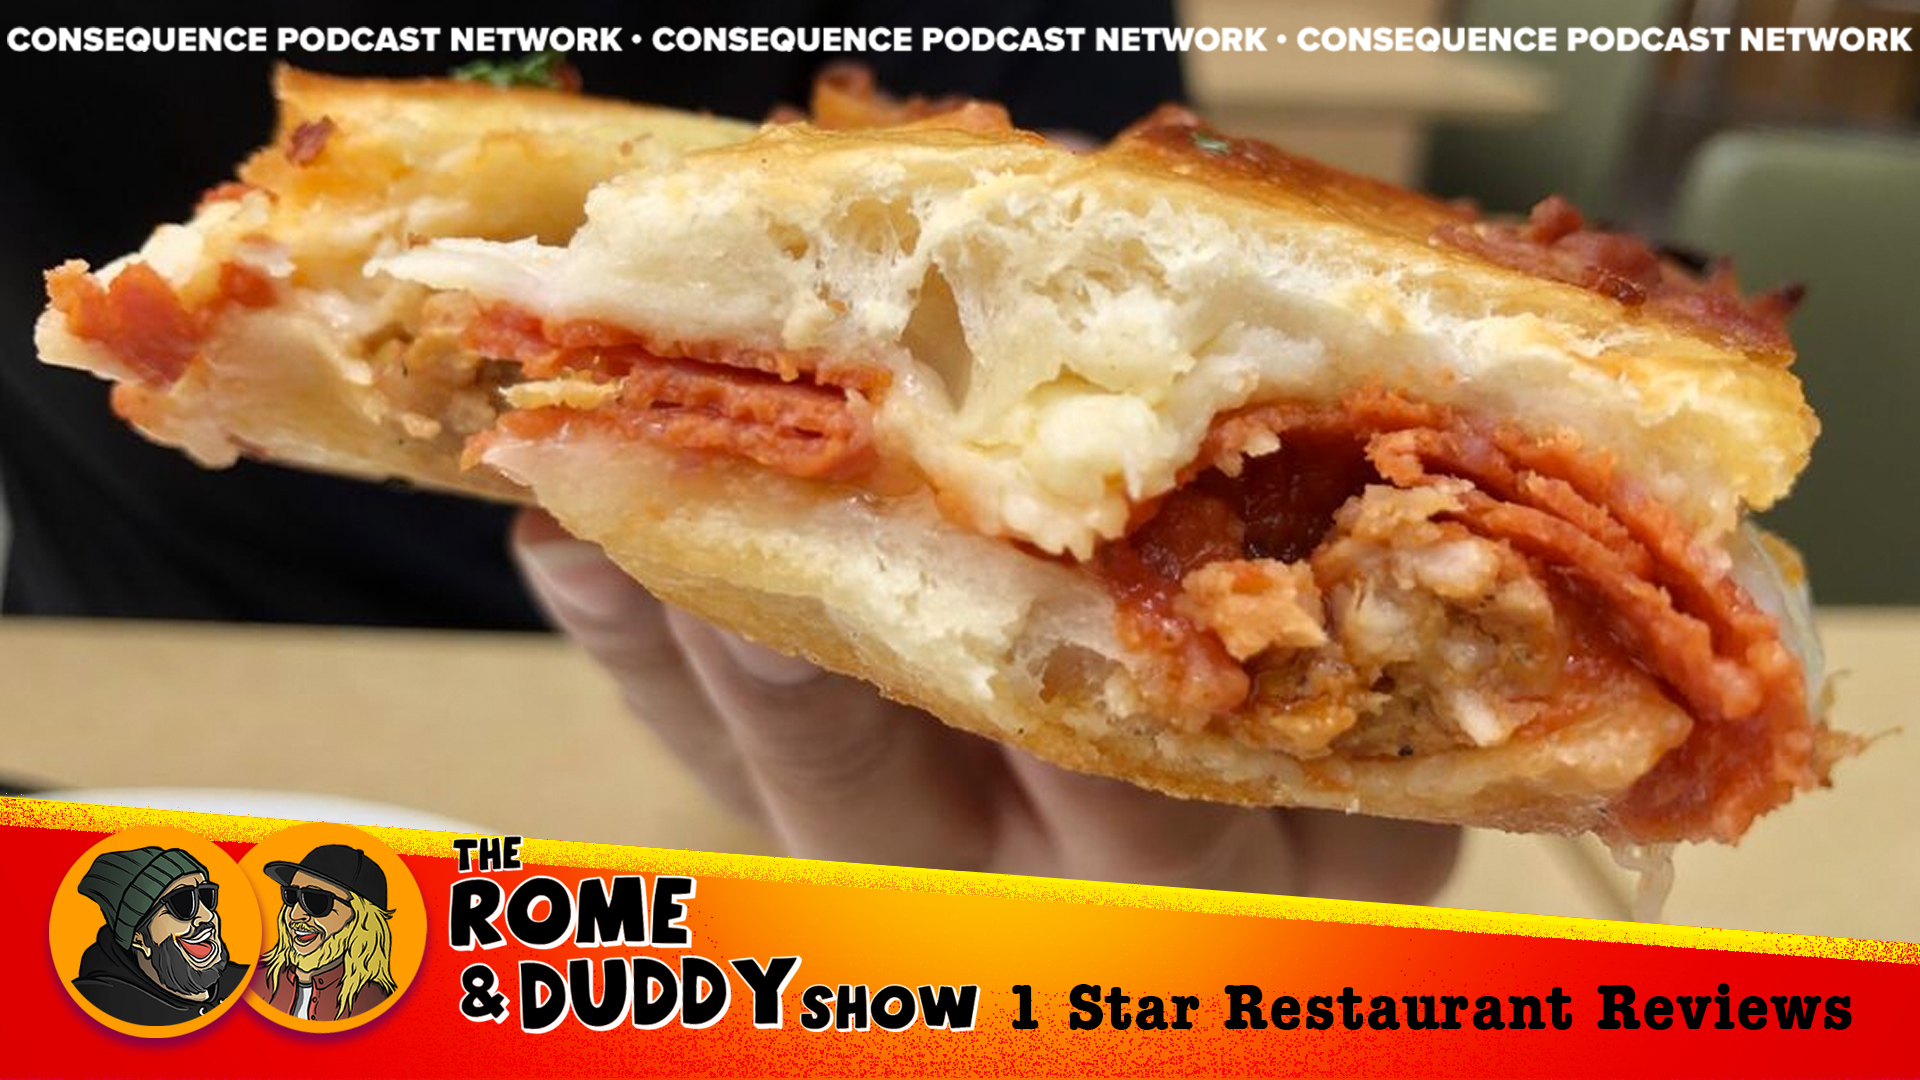 The Rome and Duddy Show: Introducing 1 Star Reviews